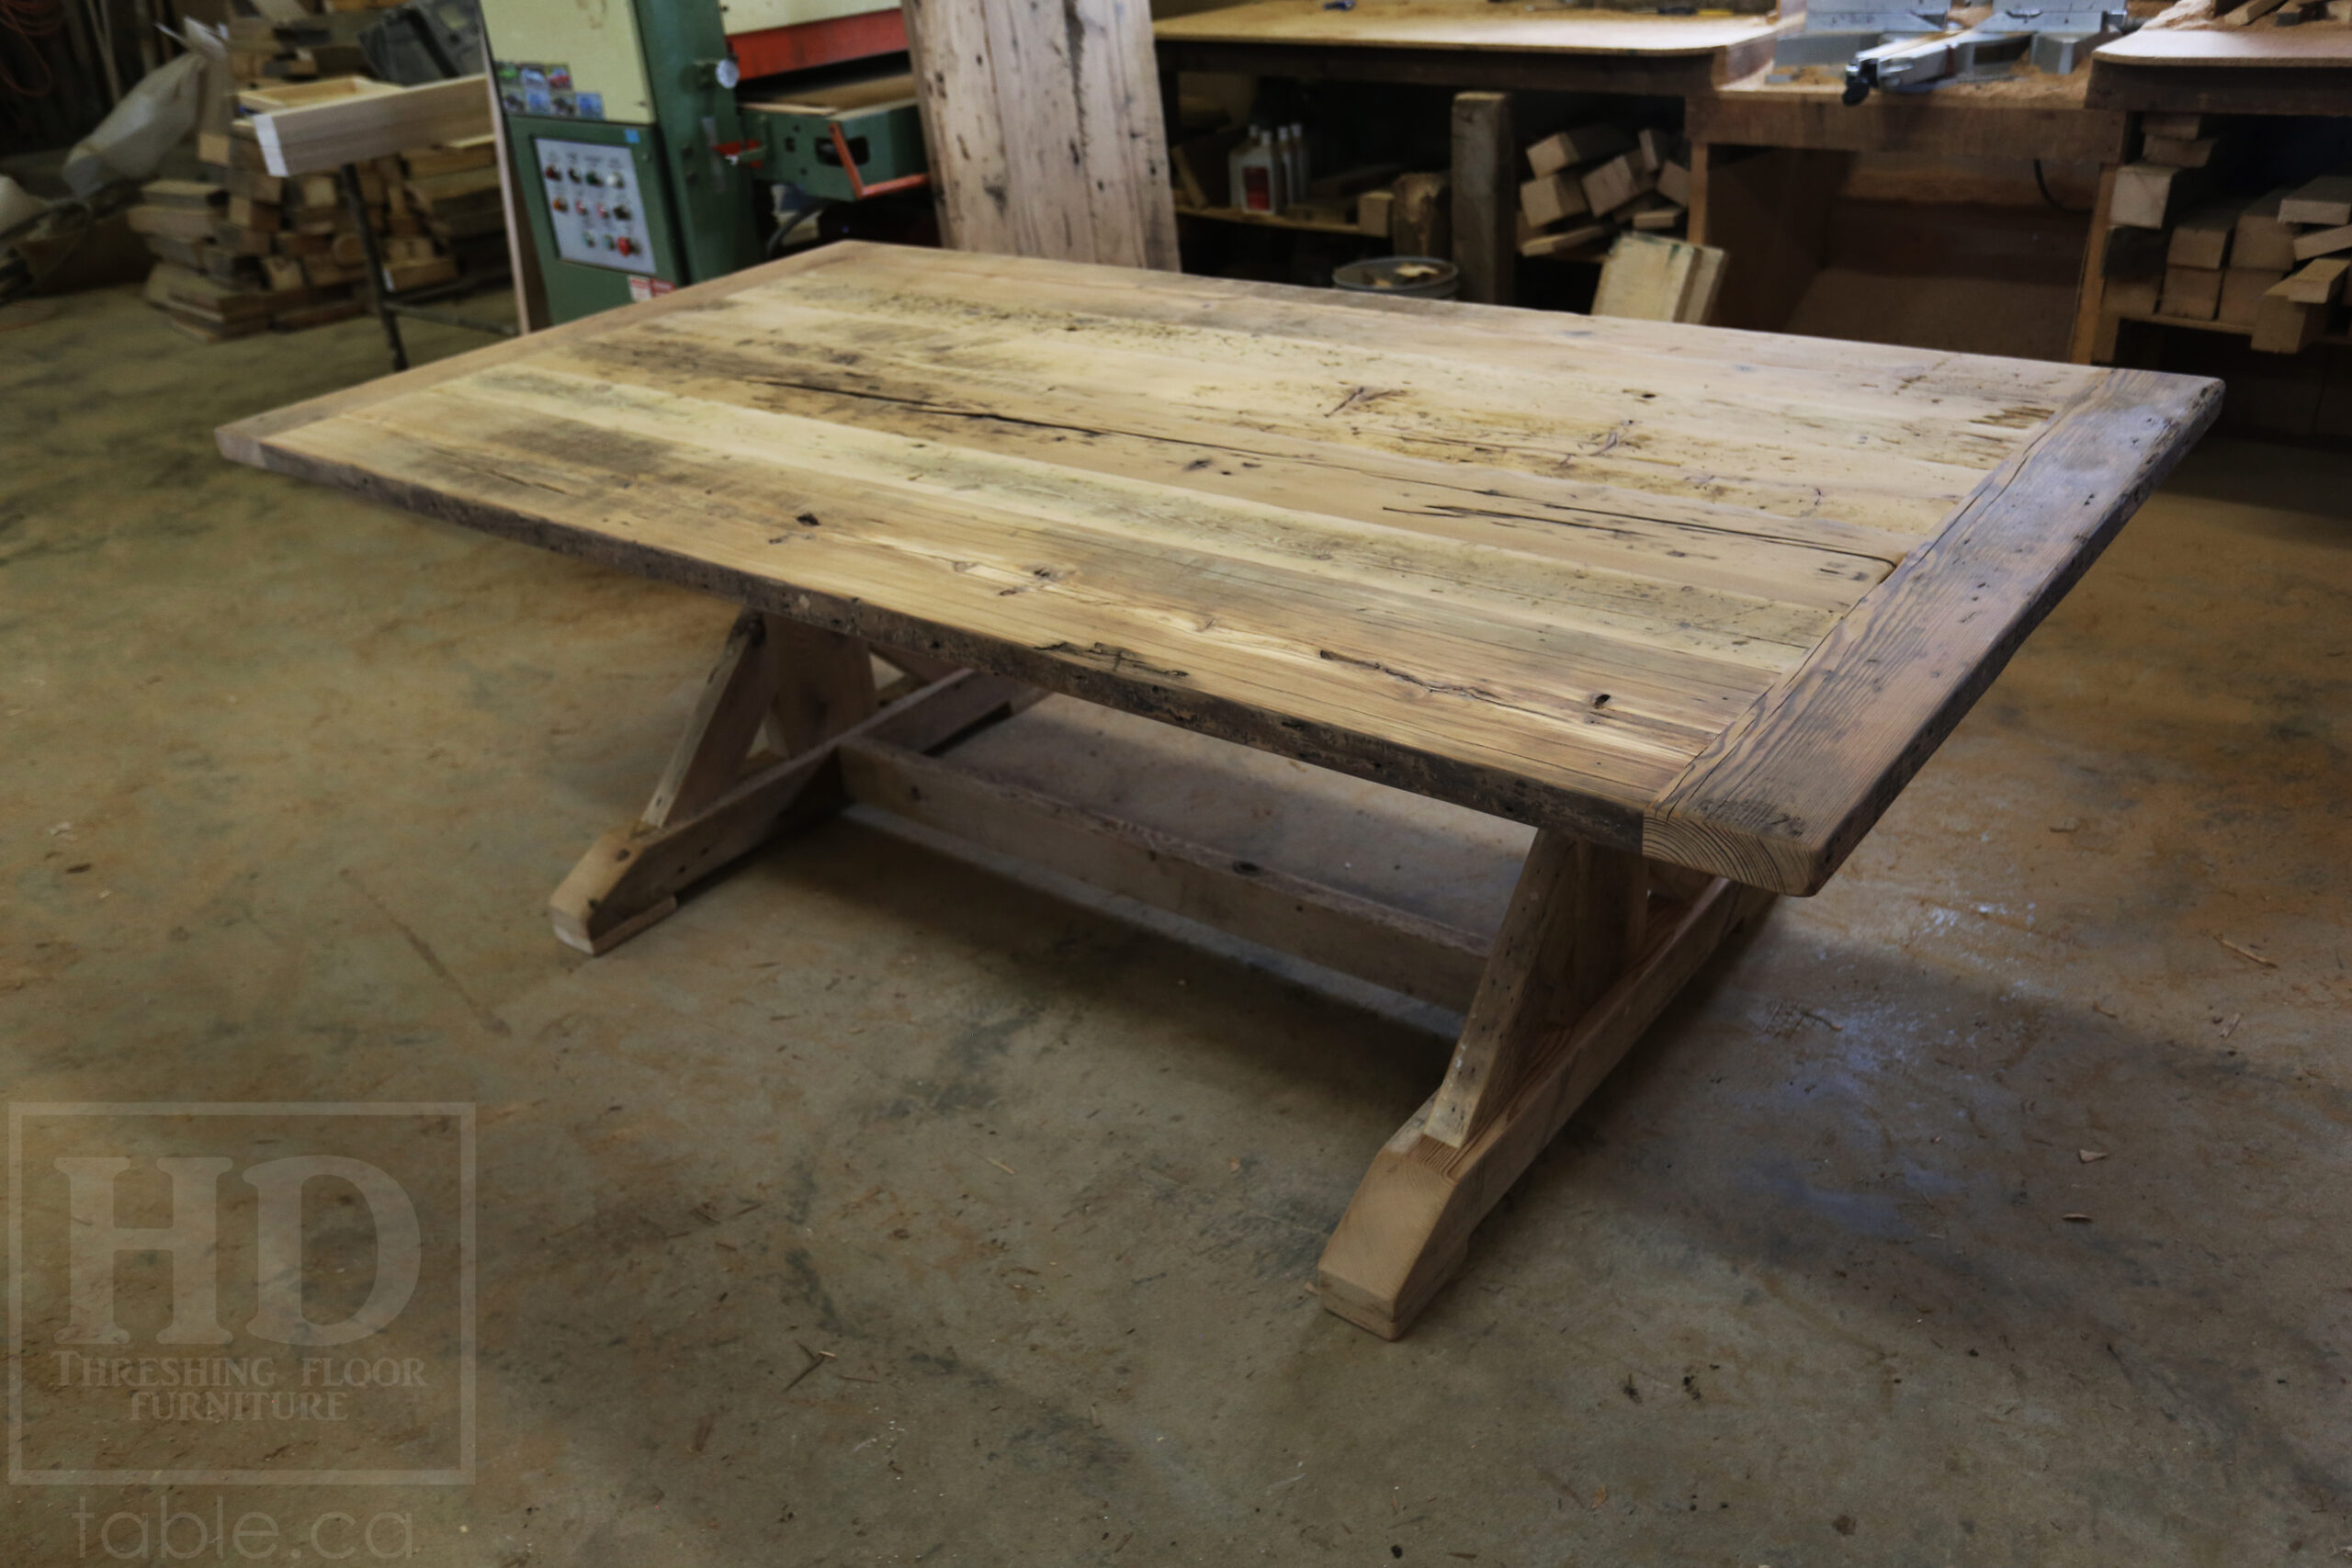 Project Summary: 7’ 6” Reclaimed Ontario Barnwood Table we made for a Fergus, Ontario home – 48” wide – Sawbuck Base - Old Growth Hemlock Threshing Floor Construction - Original edges & distressing maintained – Bread Edge Boards - Premium epoxy + satin polyurethane finish – 7’ 6” [matching] Trestle Bench - www.table.ca